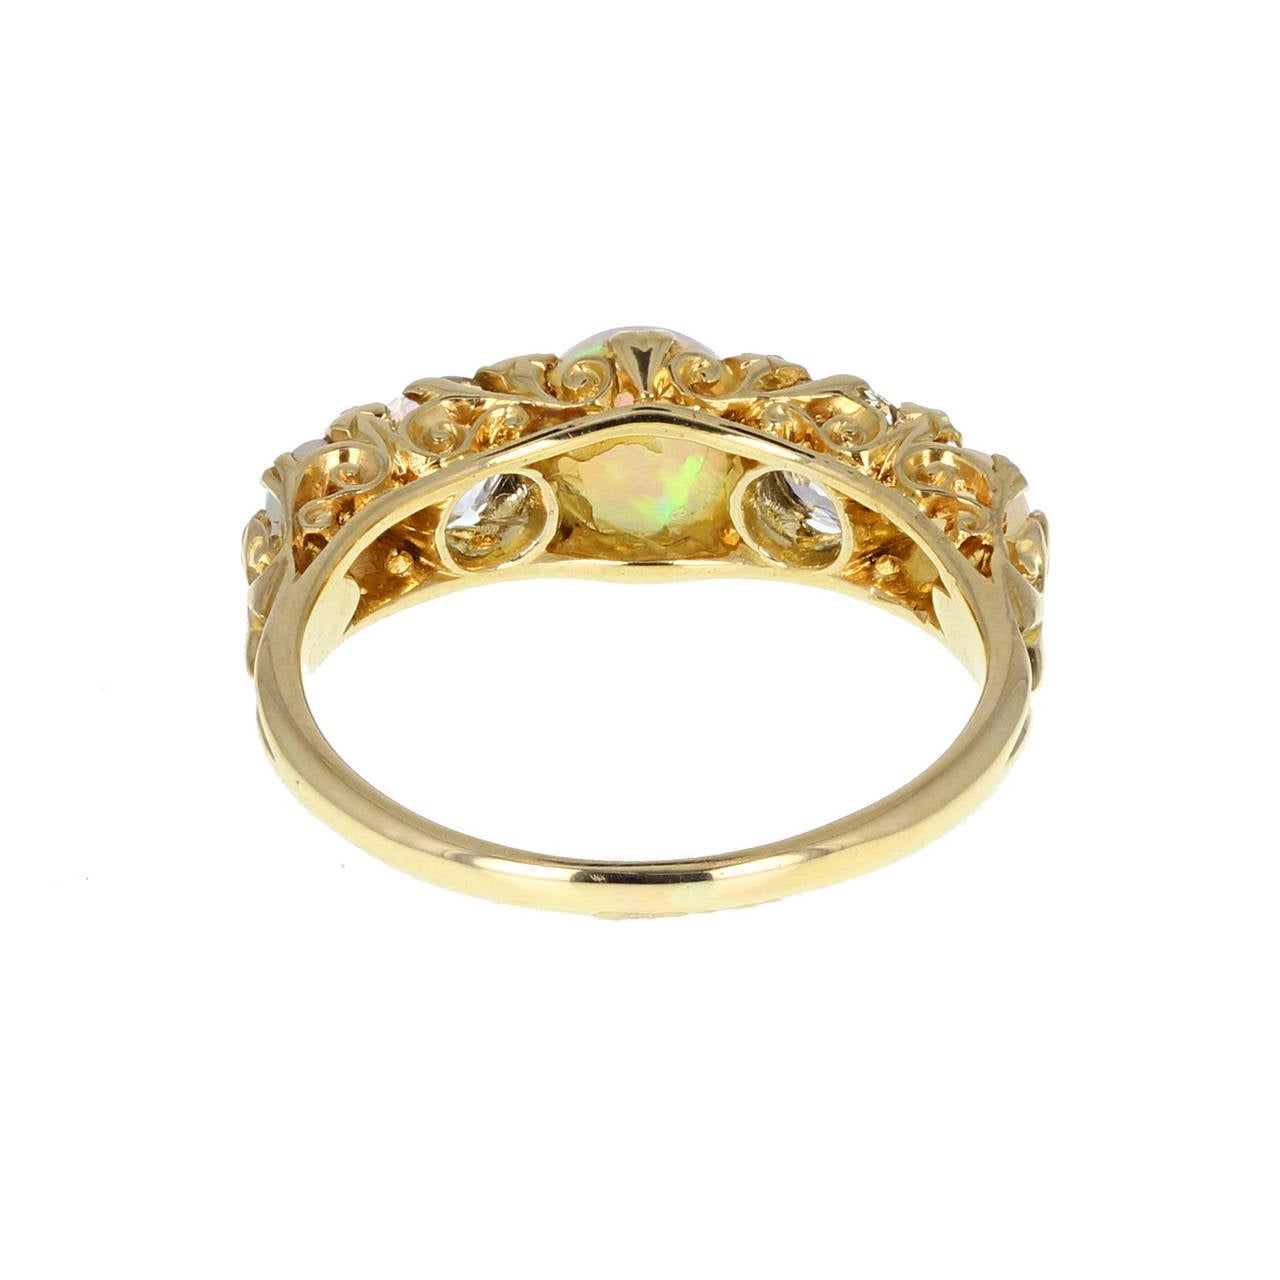 Edwardian Antique Carved Gallery Set Opal Diamond Five Stone Ring